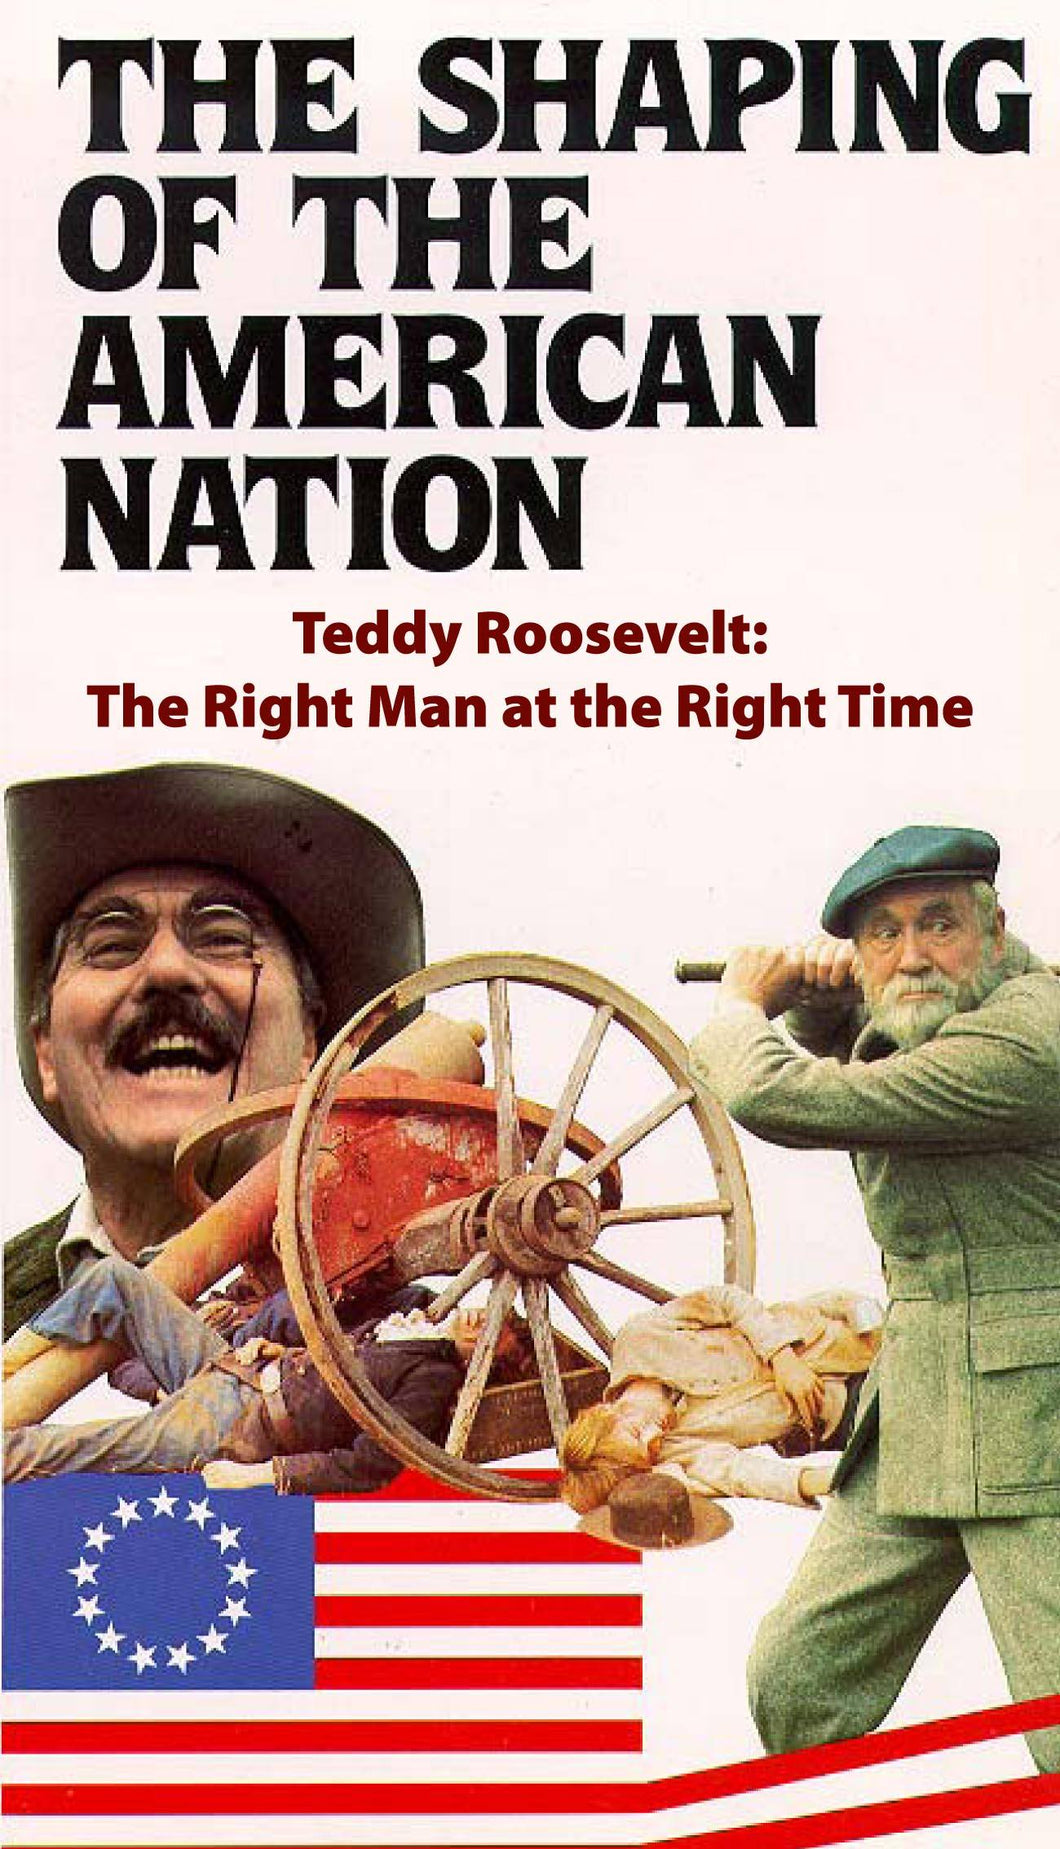 Teddy Roosevelt, Right Man at the Right Time